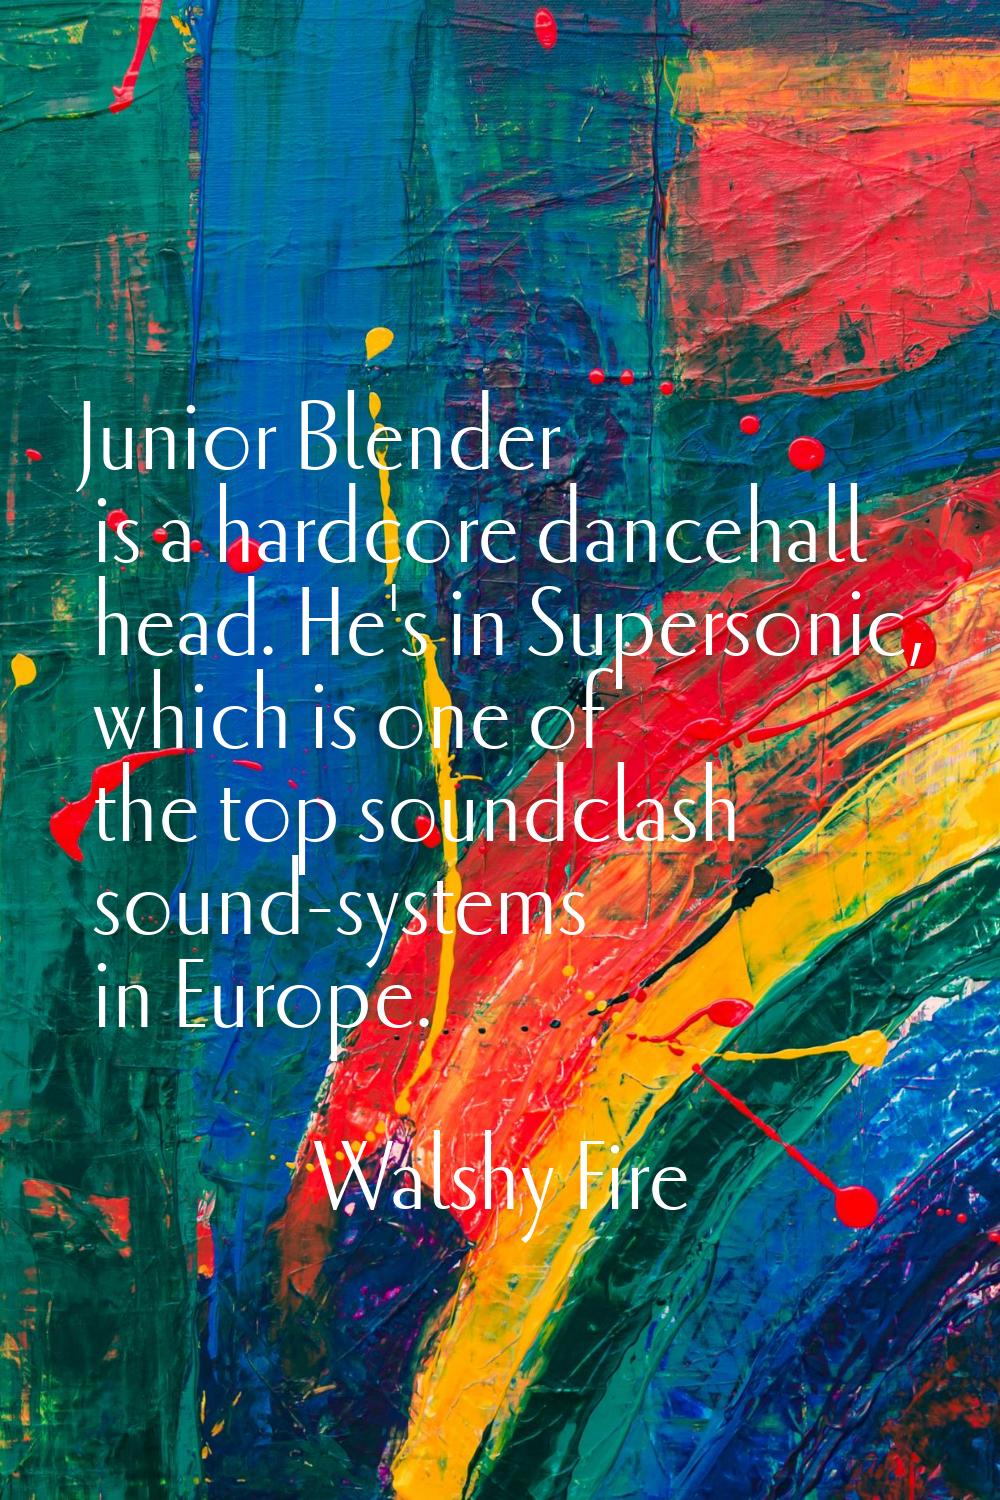 Junior Blender is a hardcore dancehall head. He's in Supersonic, which is one of the top soundclash